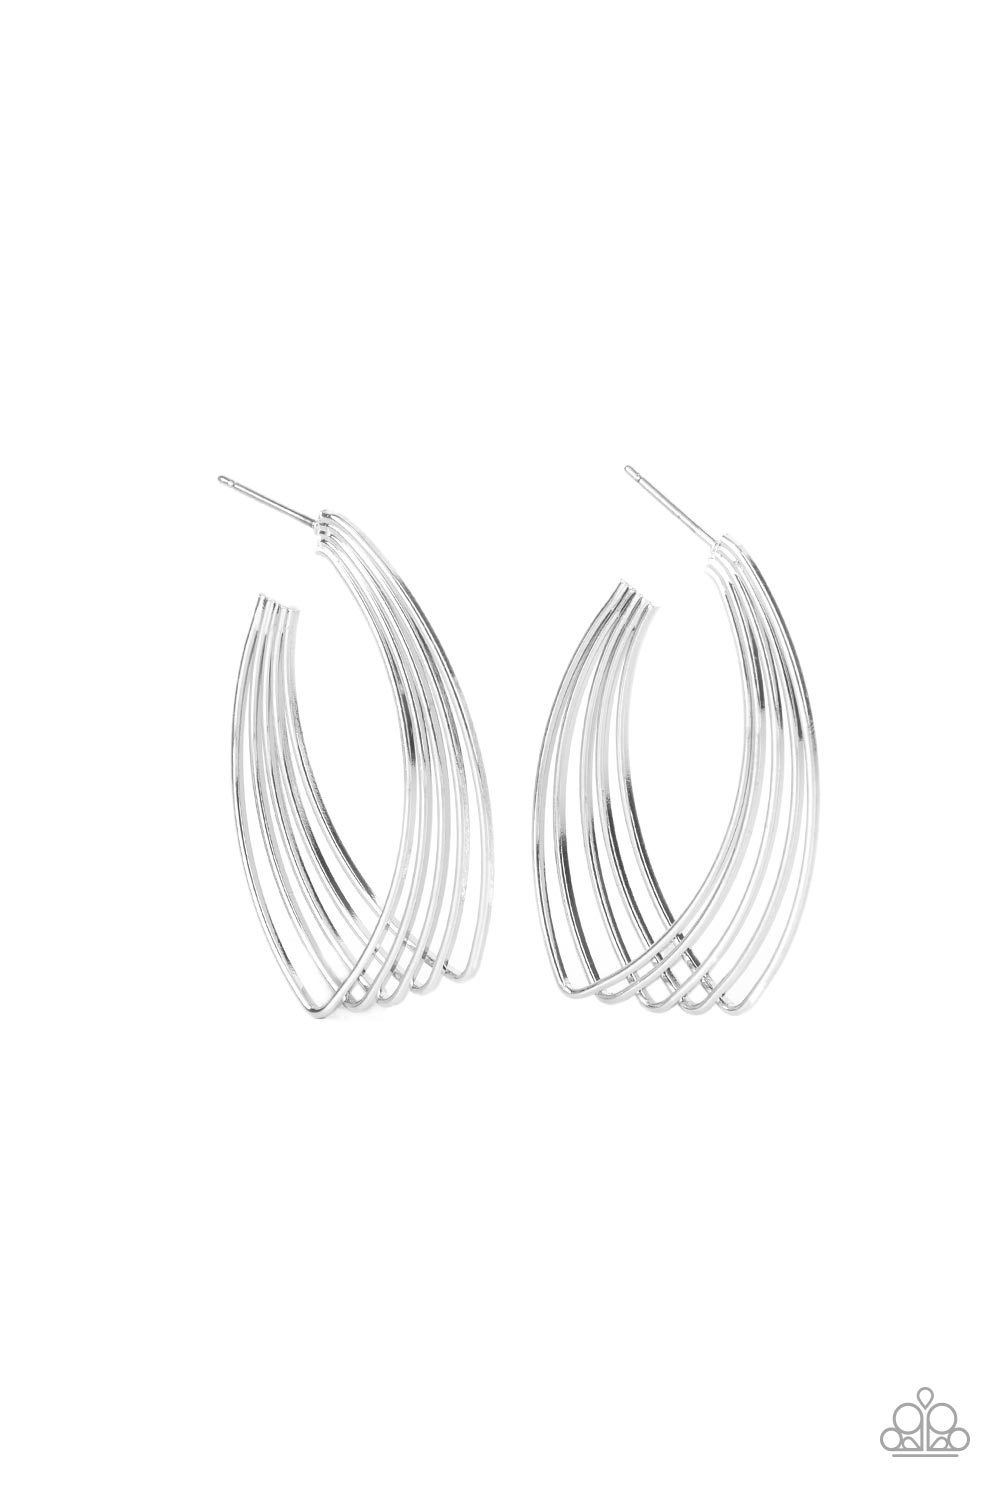 Industrial Illusion - Silver Earrings - Paparazzi Accessories 